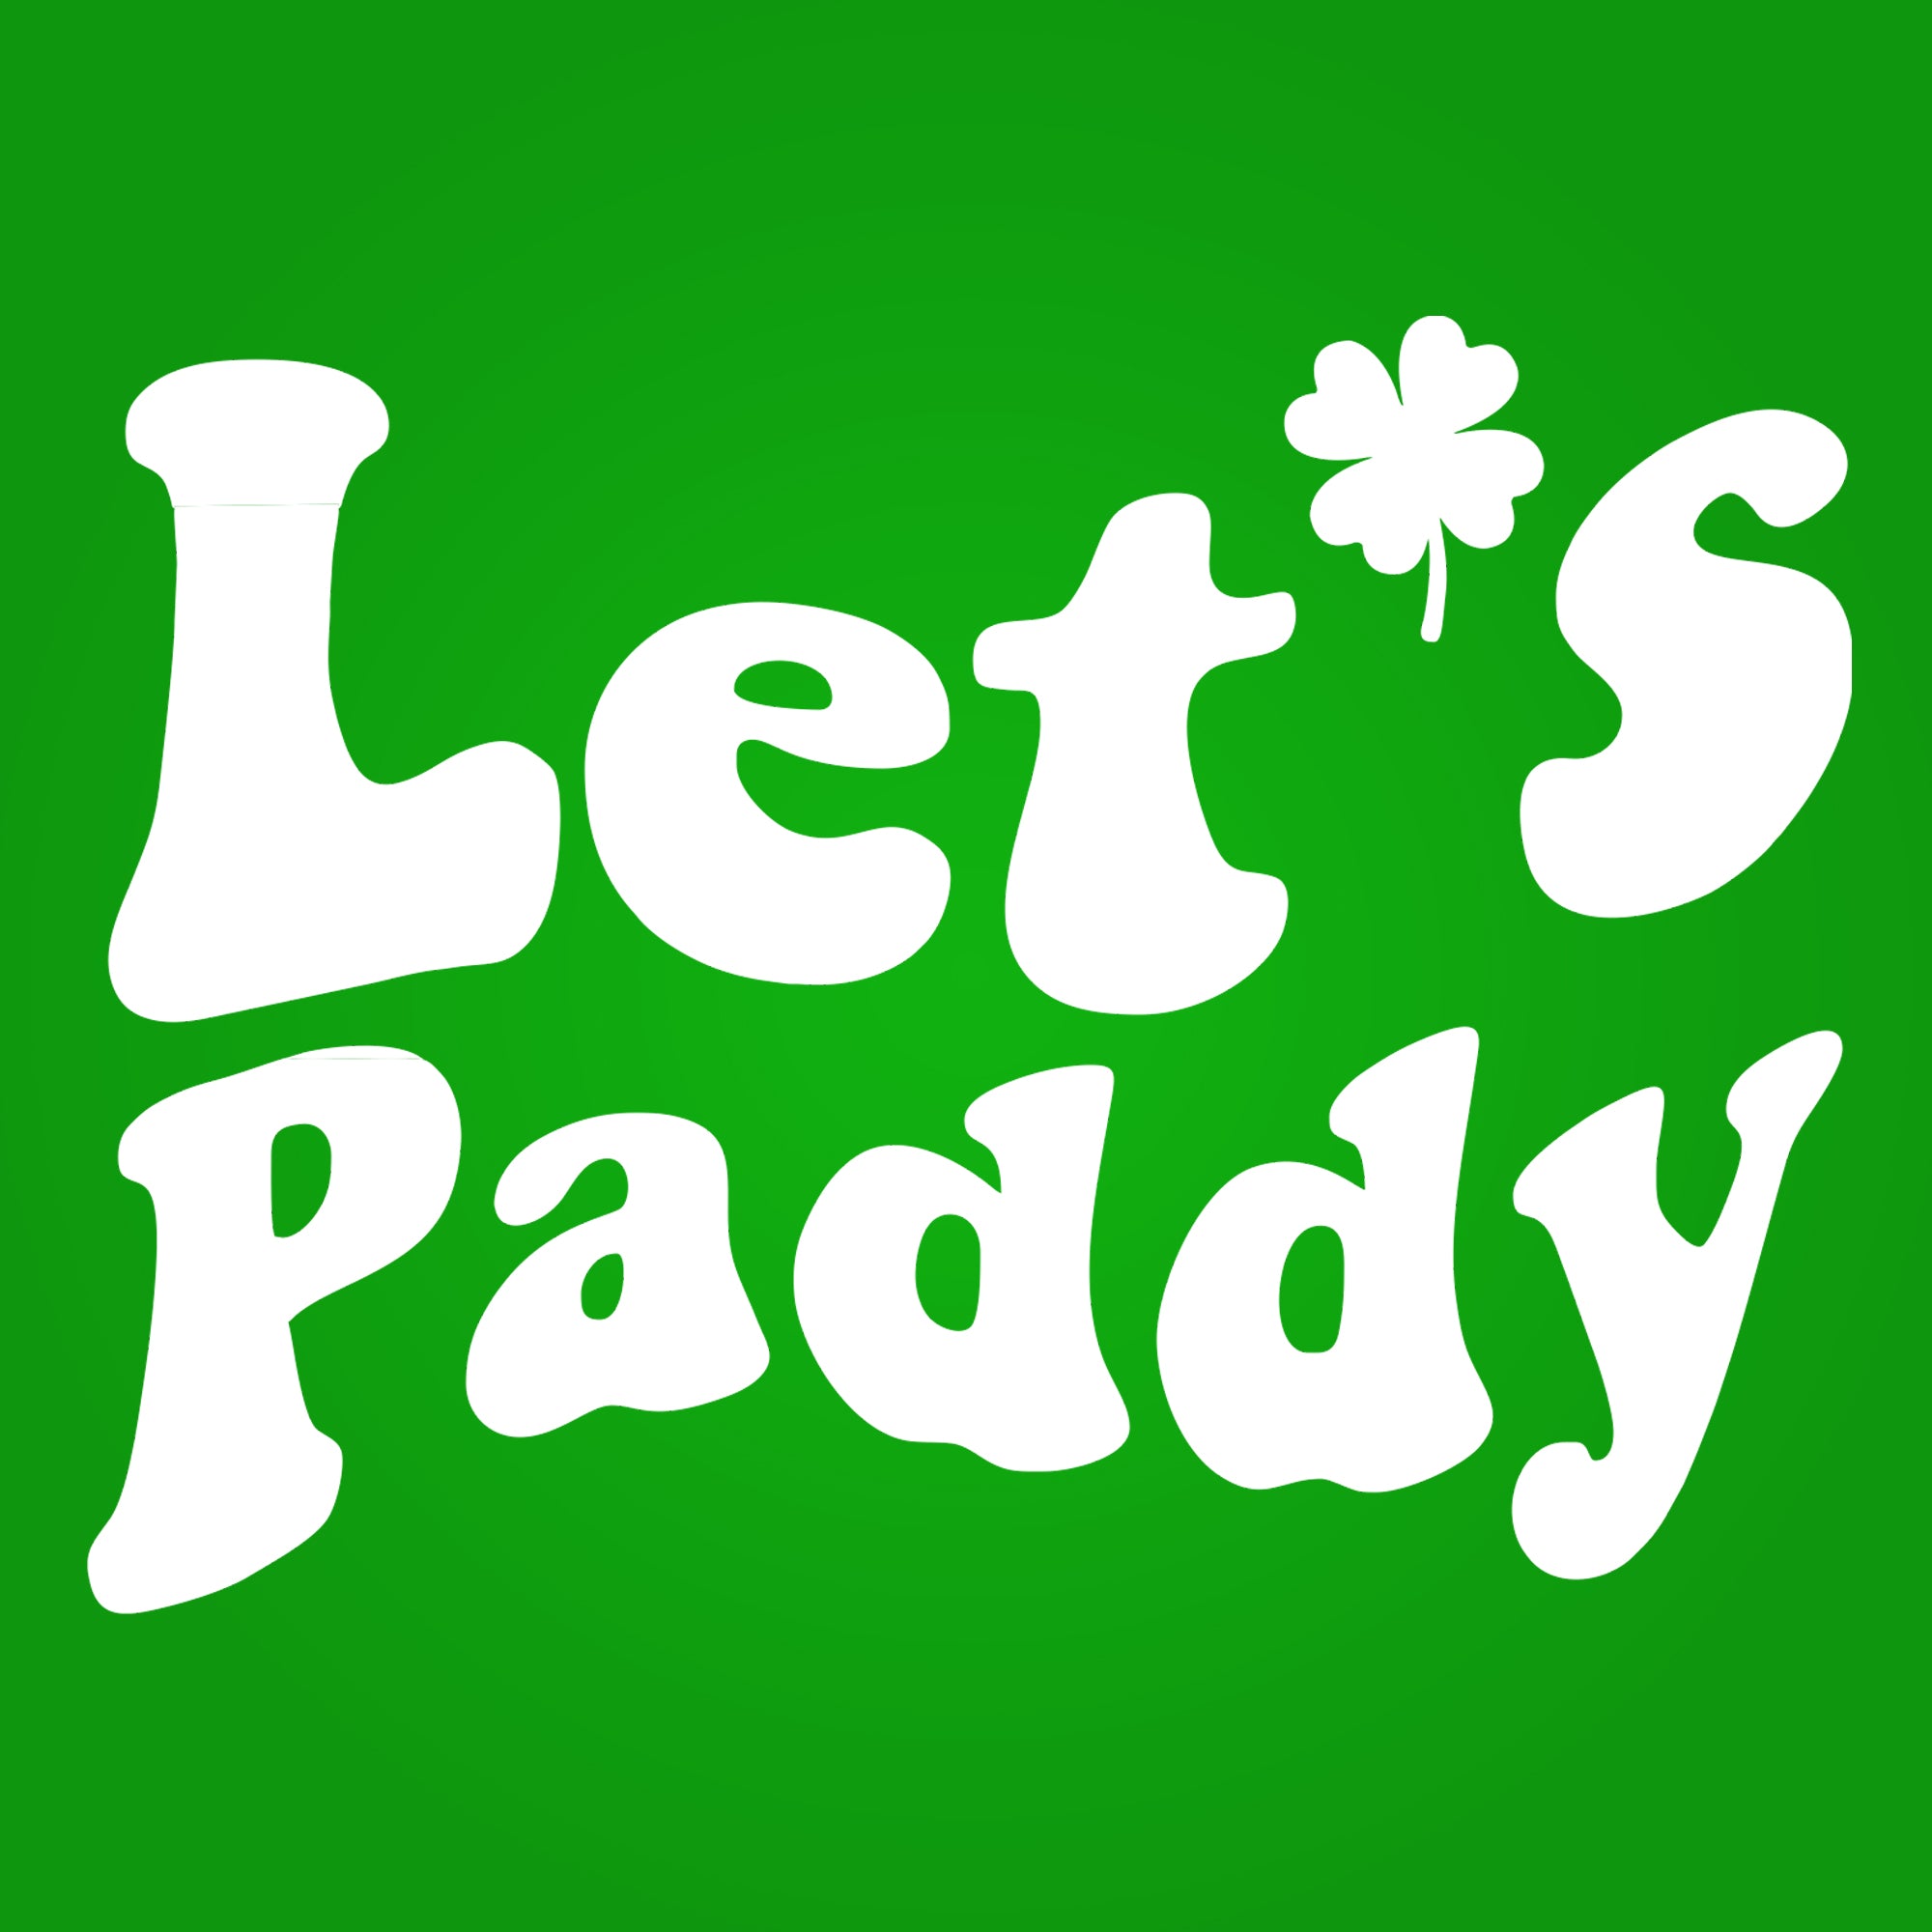 Let's Paddy